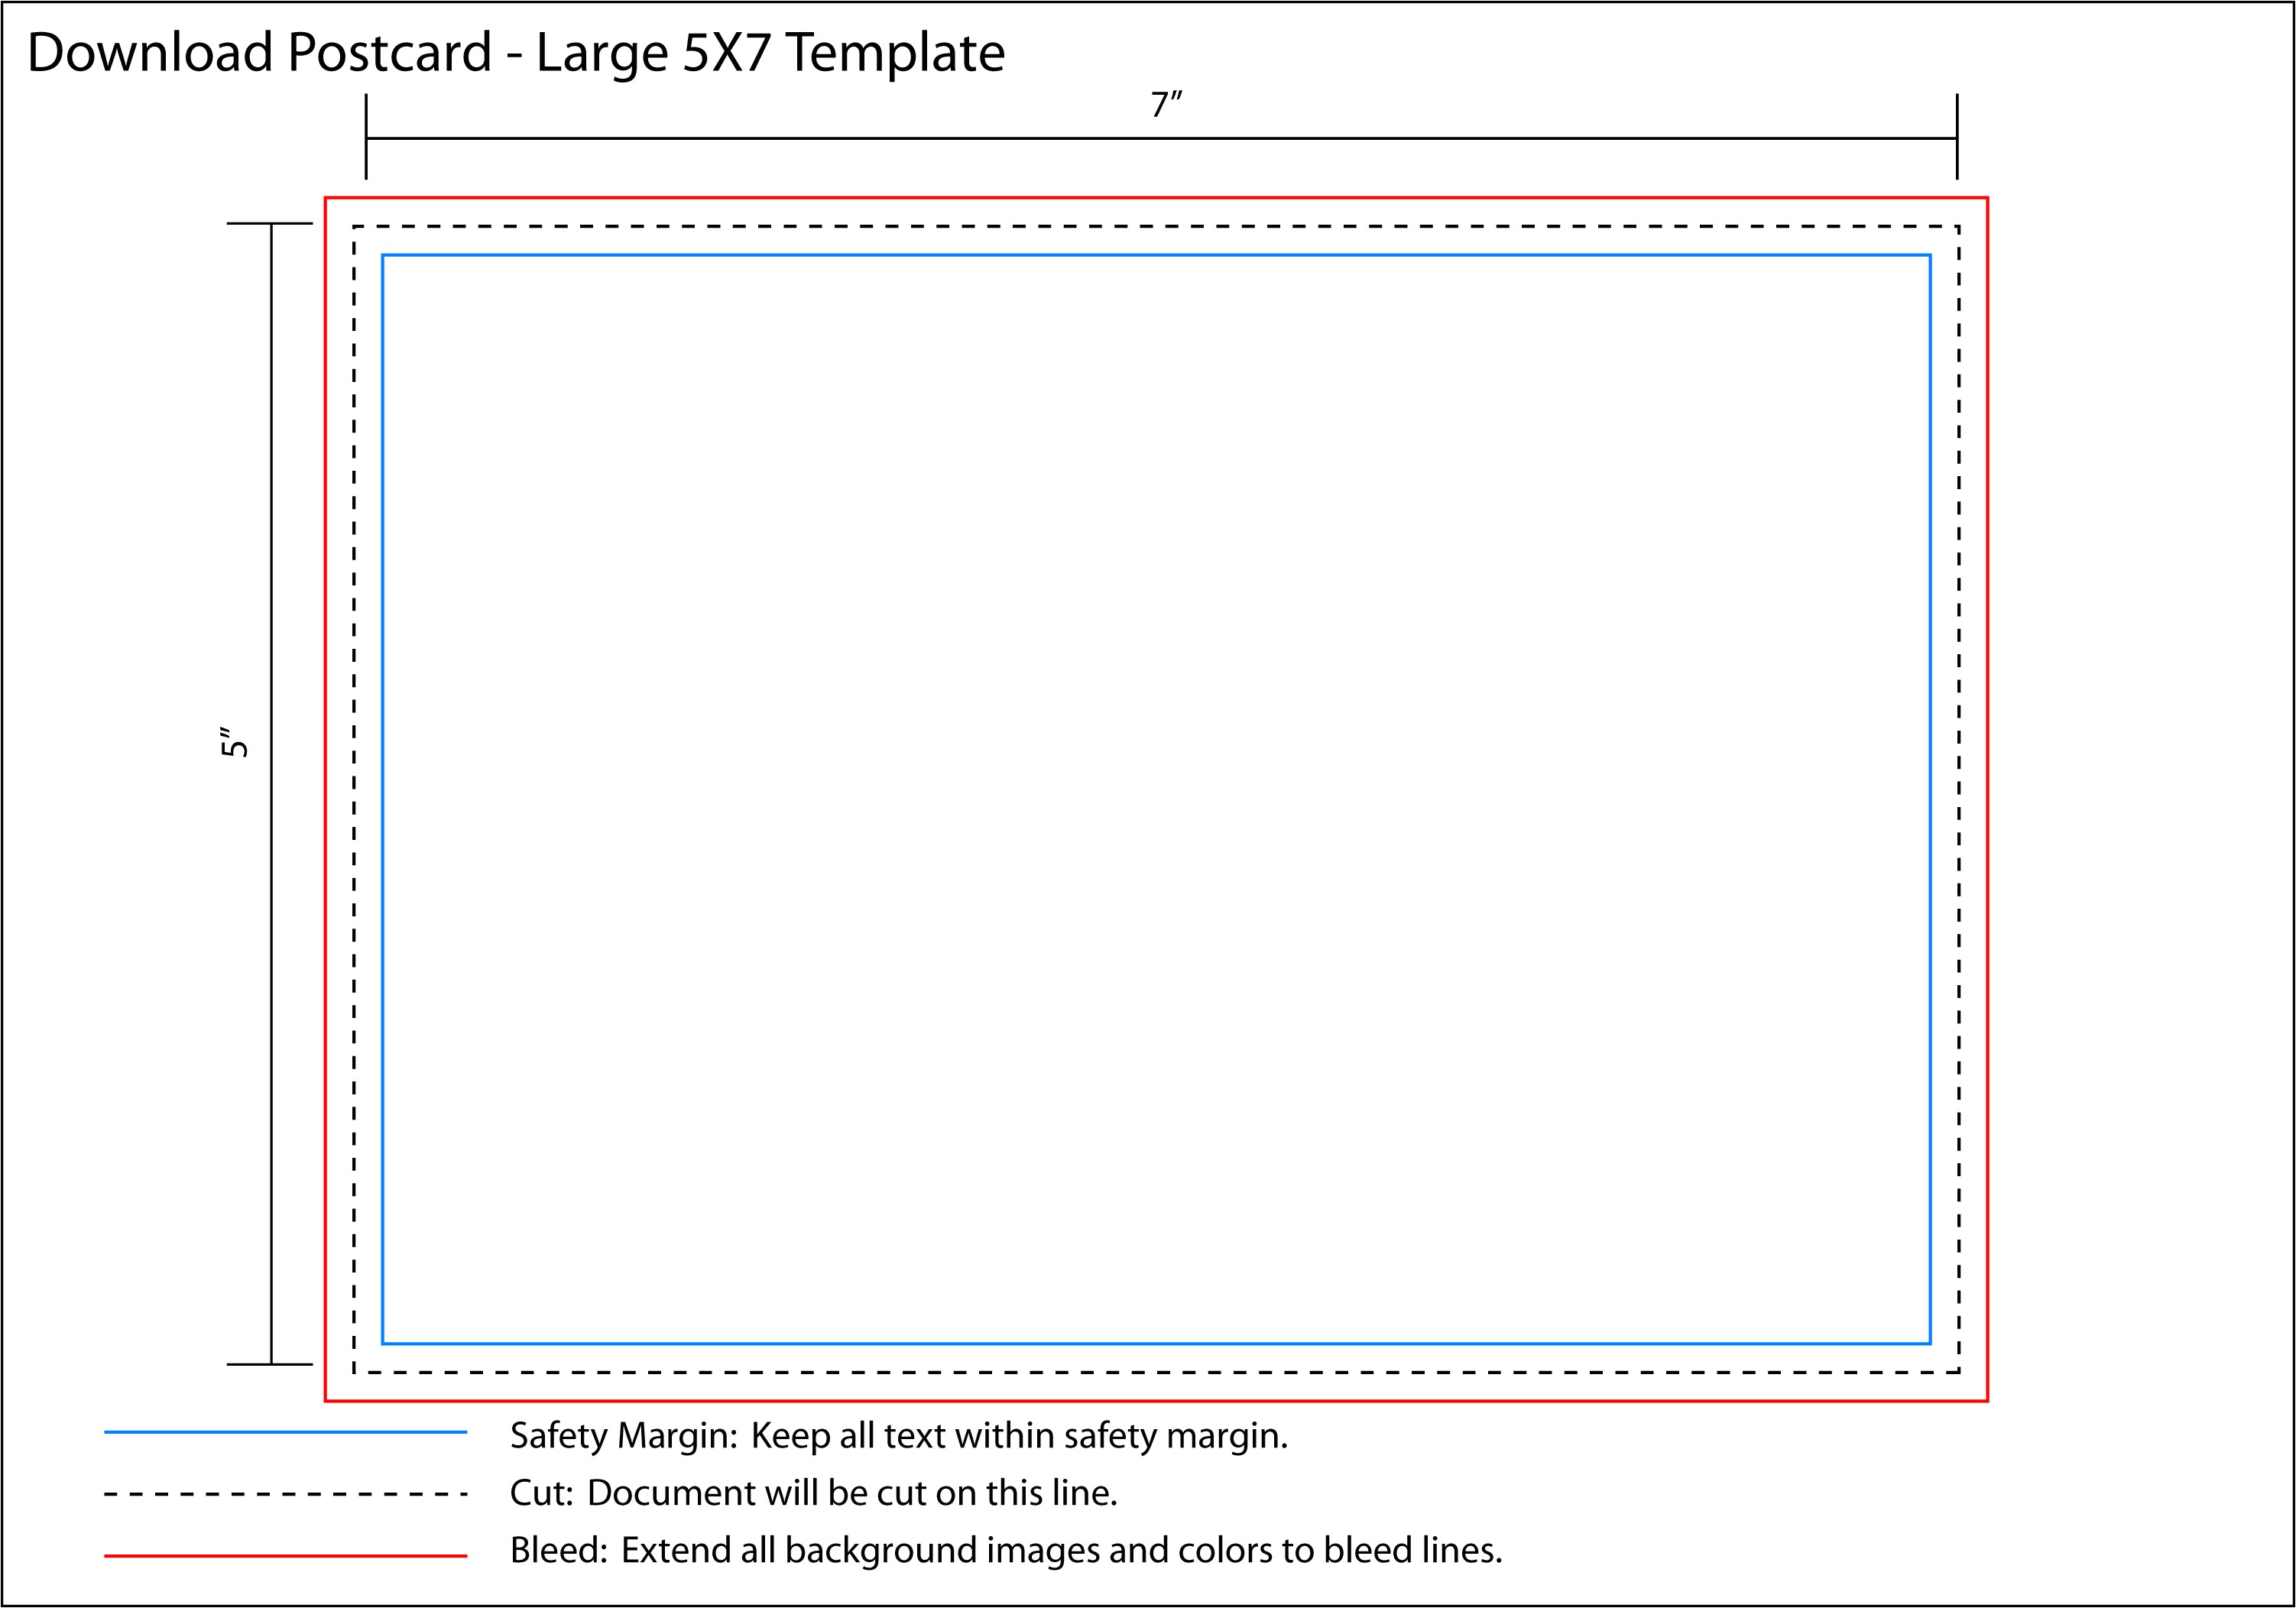 5X7 Label Template